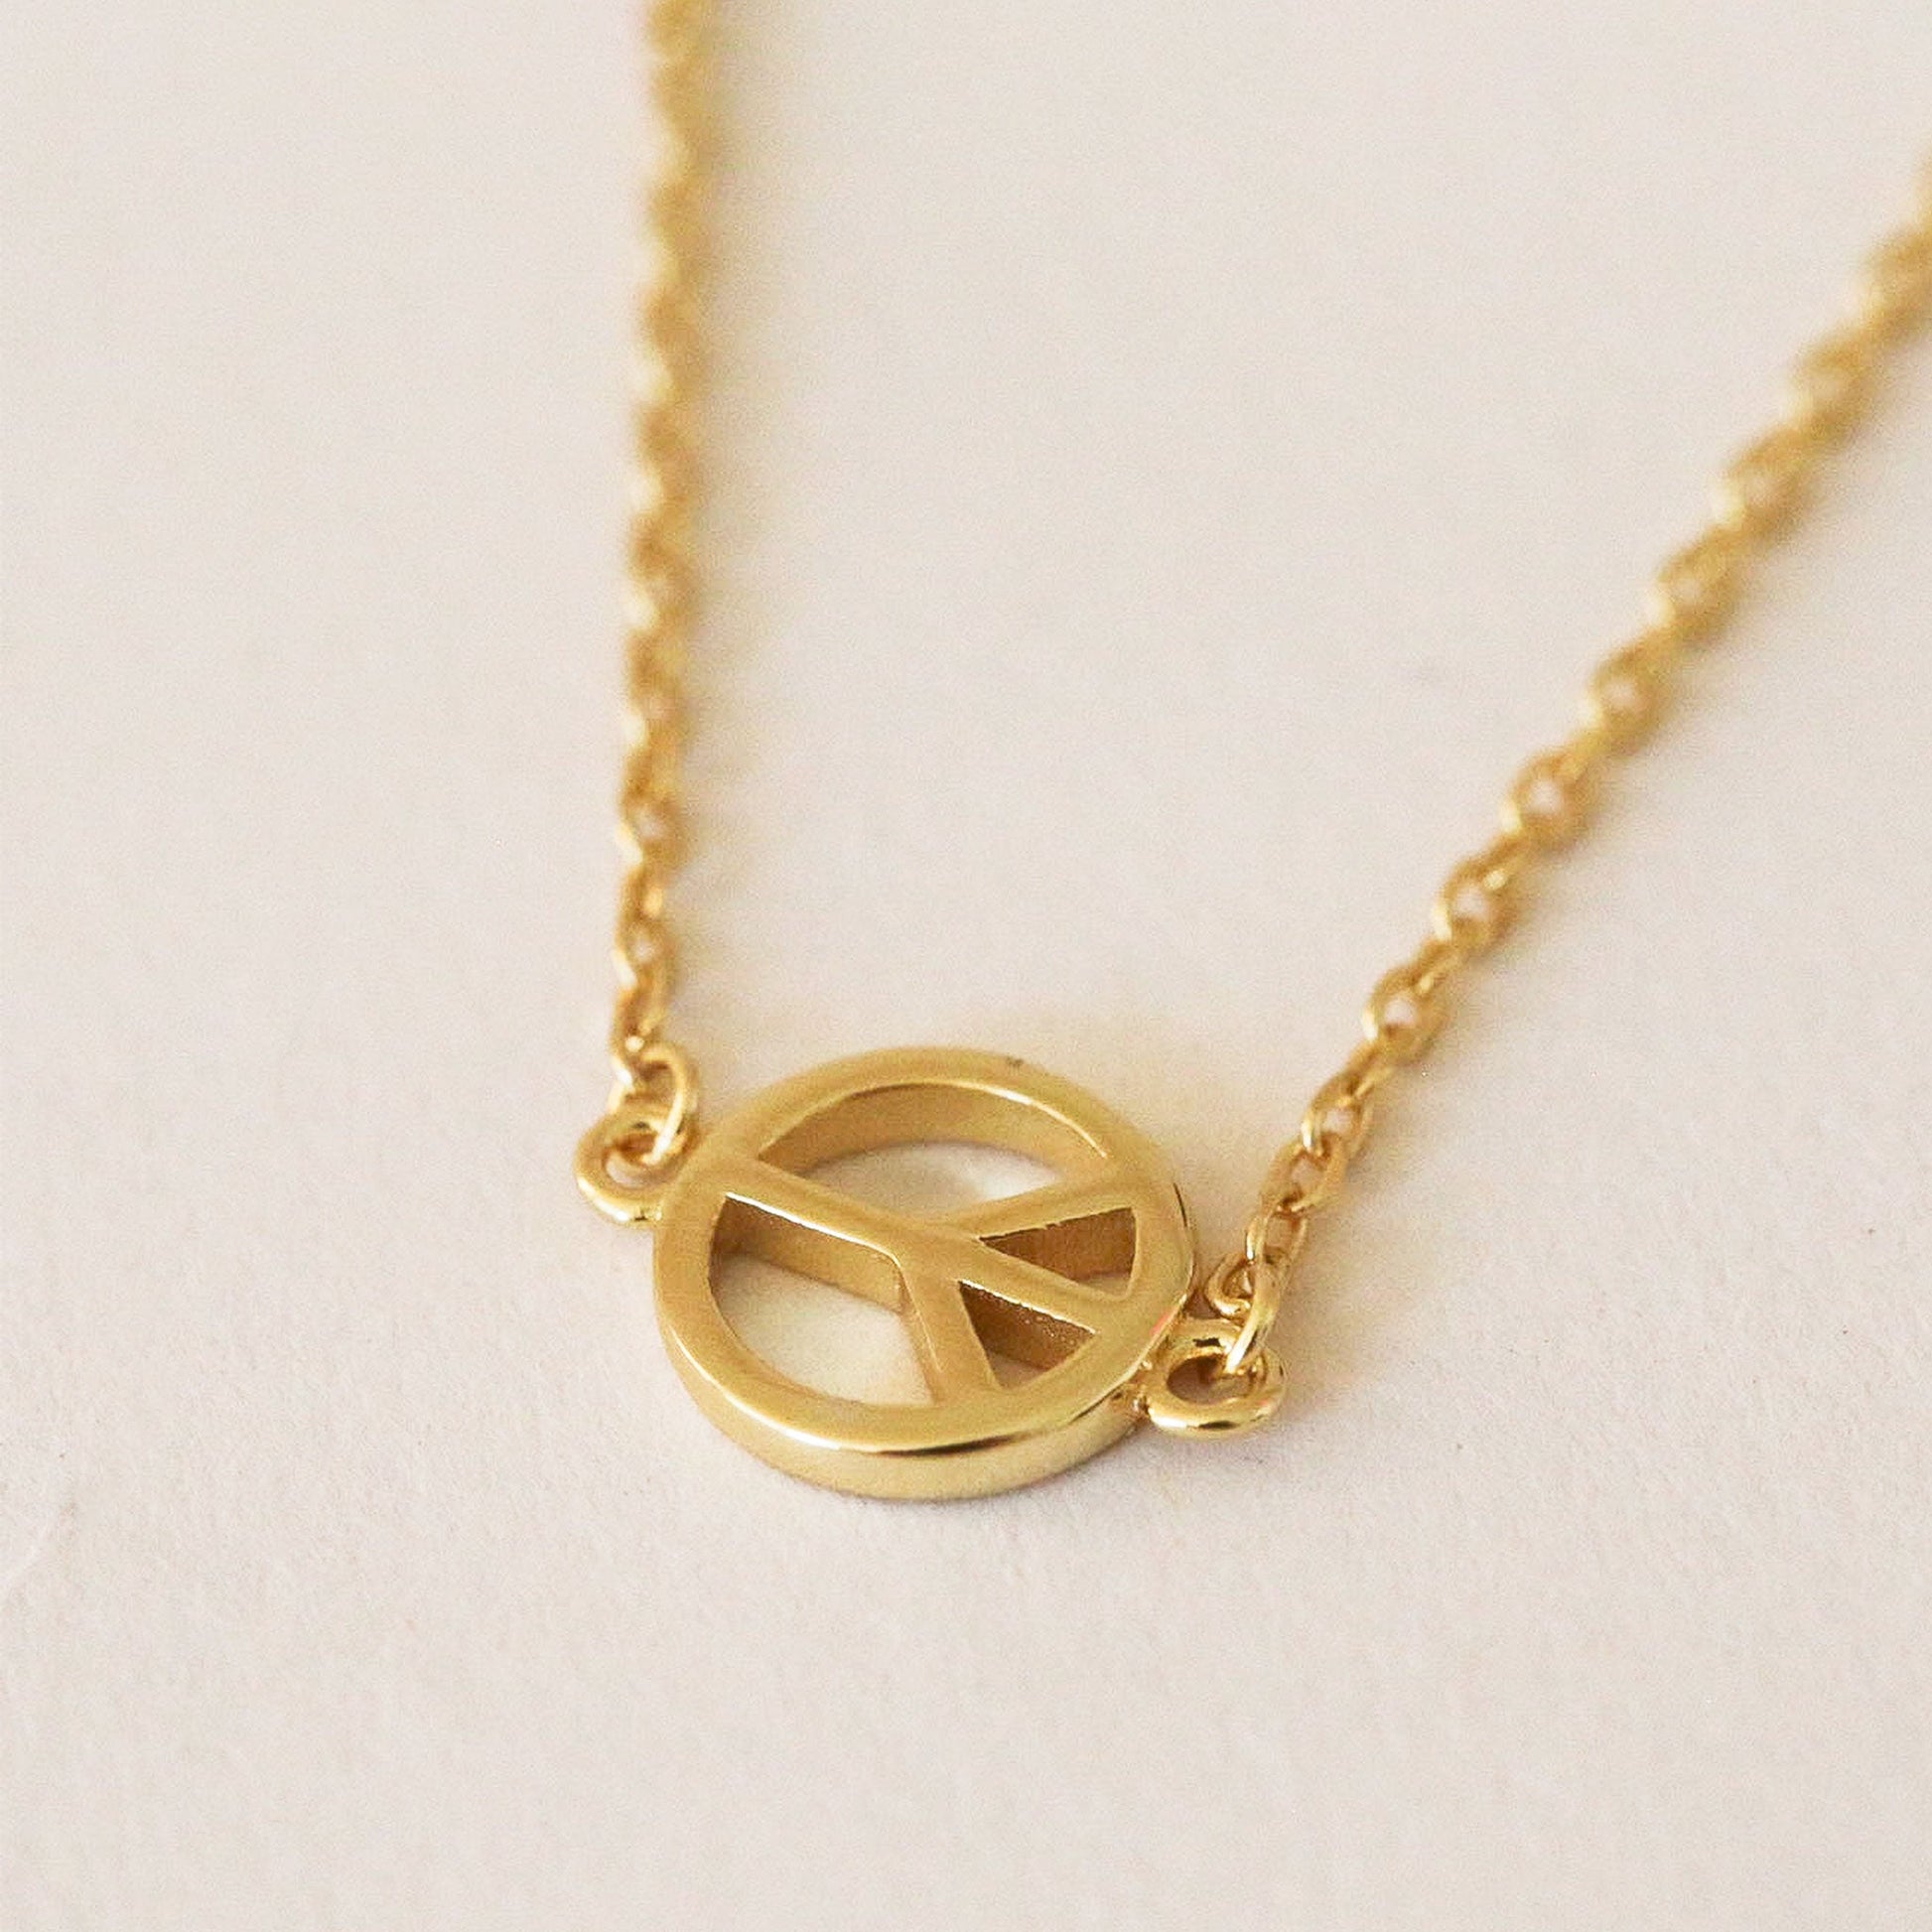 Gold chain necklace complete with classic peace sign symbol pendant. The pendent is connected to the chain by two loops on each side. 